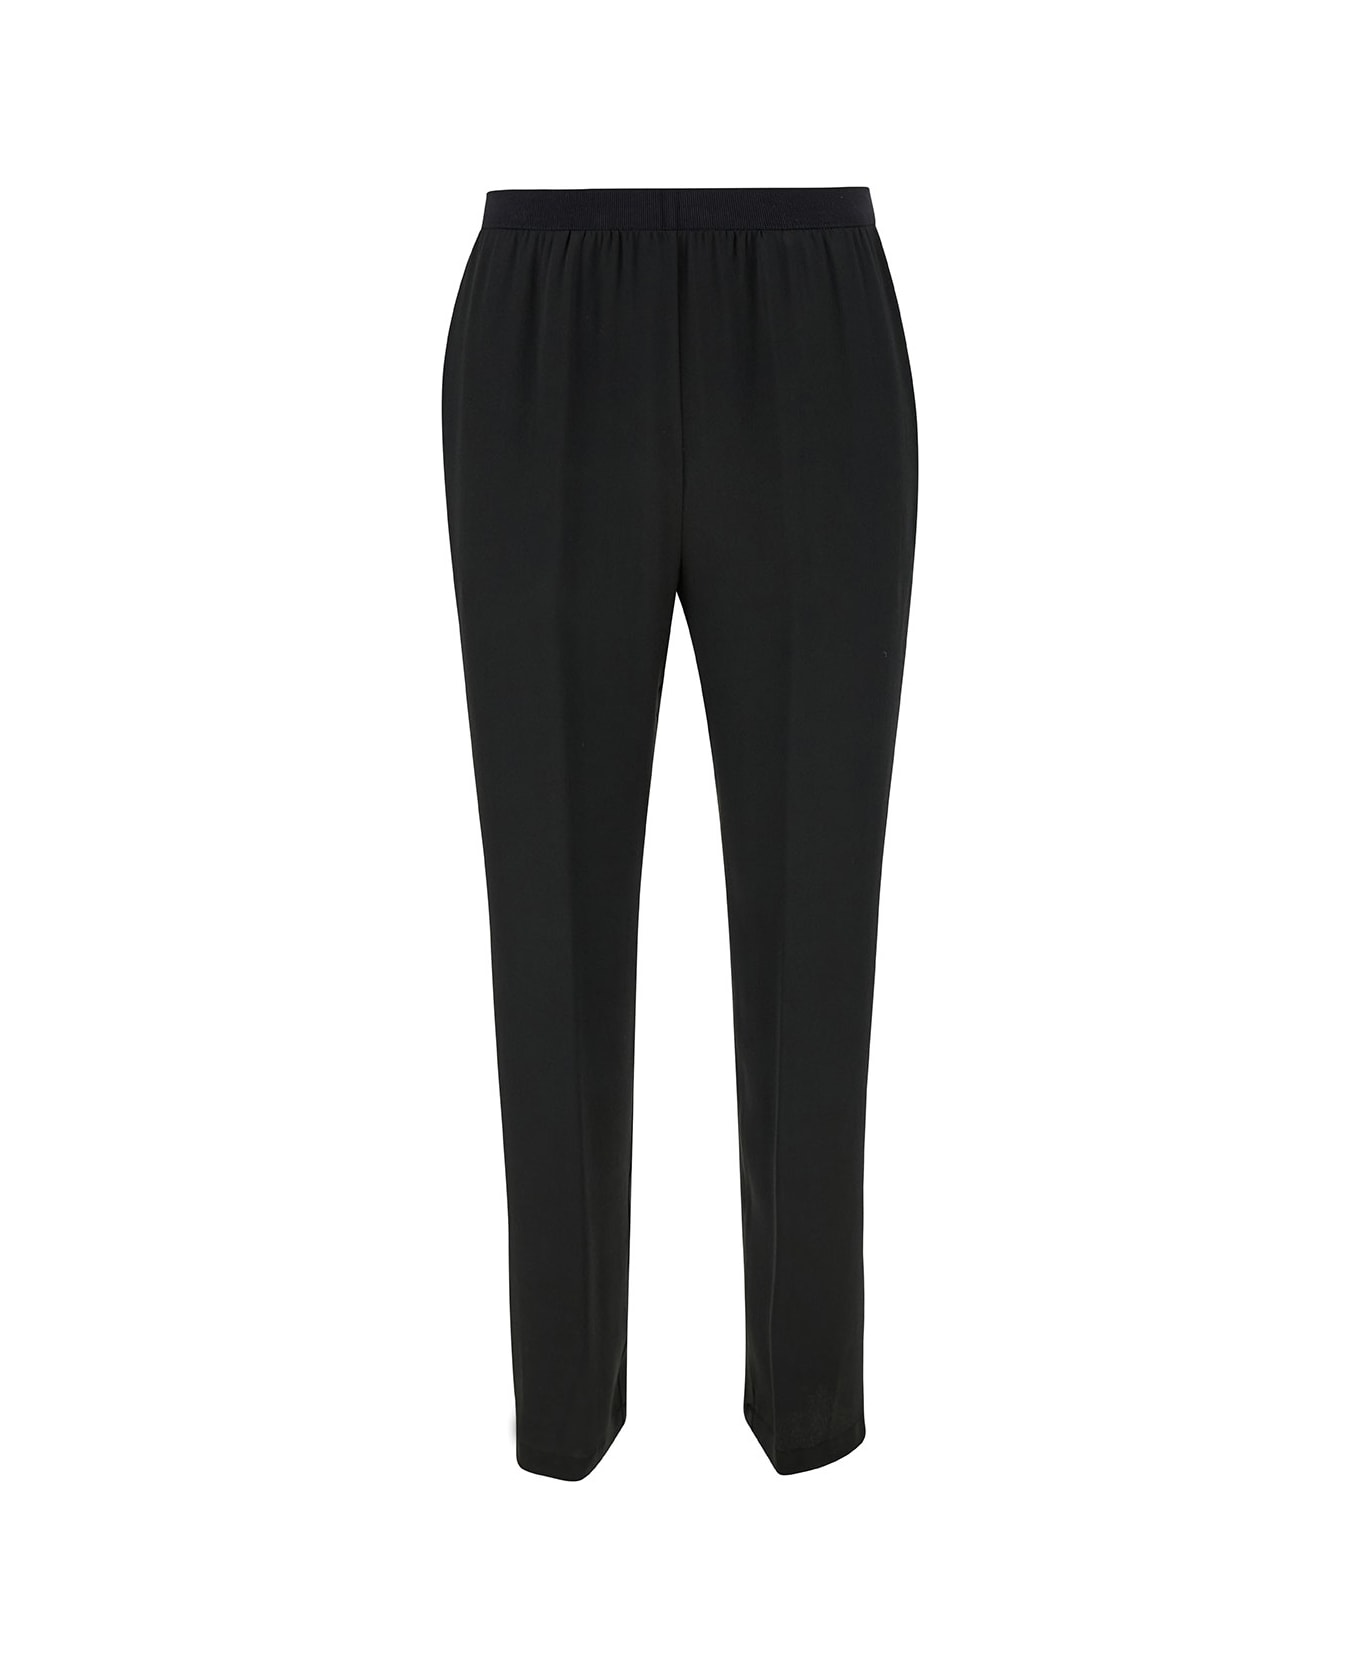 SEMICOUTURE 'philippa' Black Pants With Elastic Waistband In Acetate Blend Woman - Black ボトムス